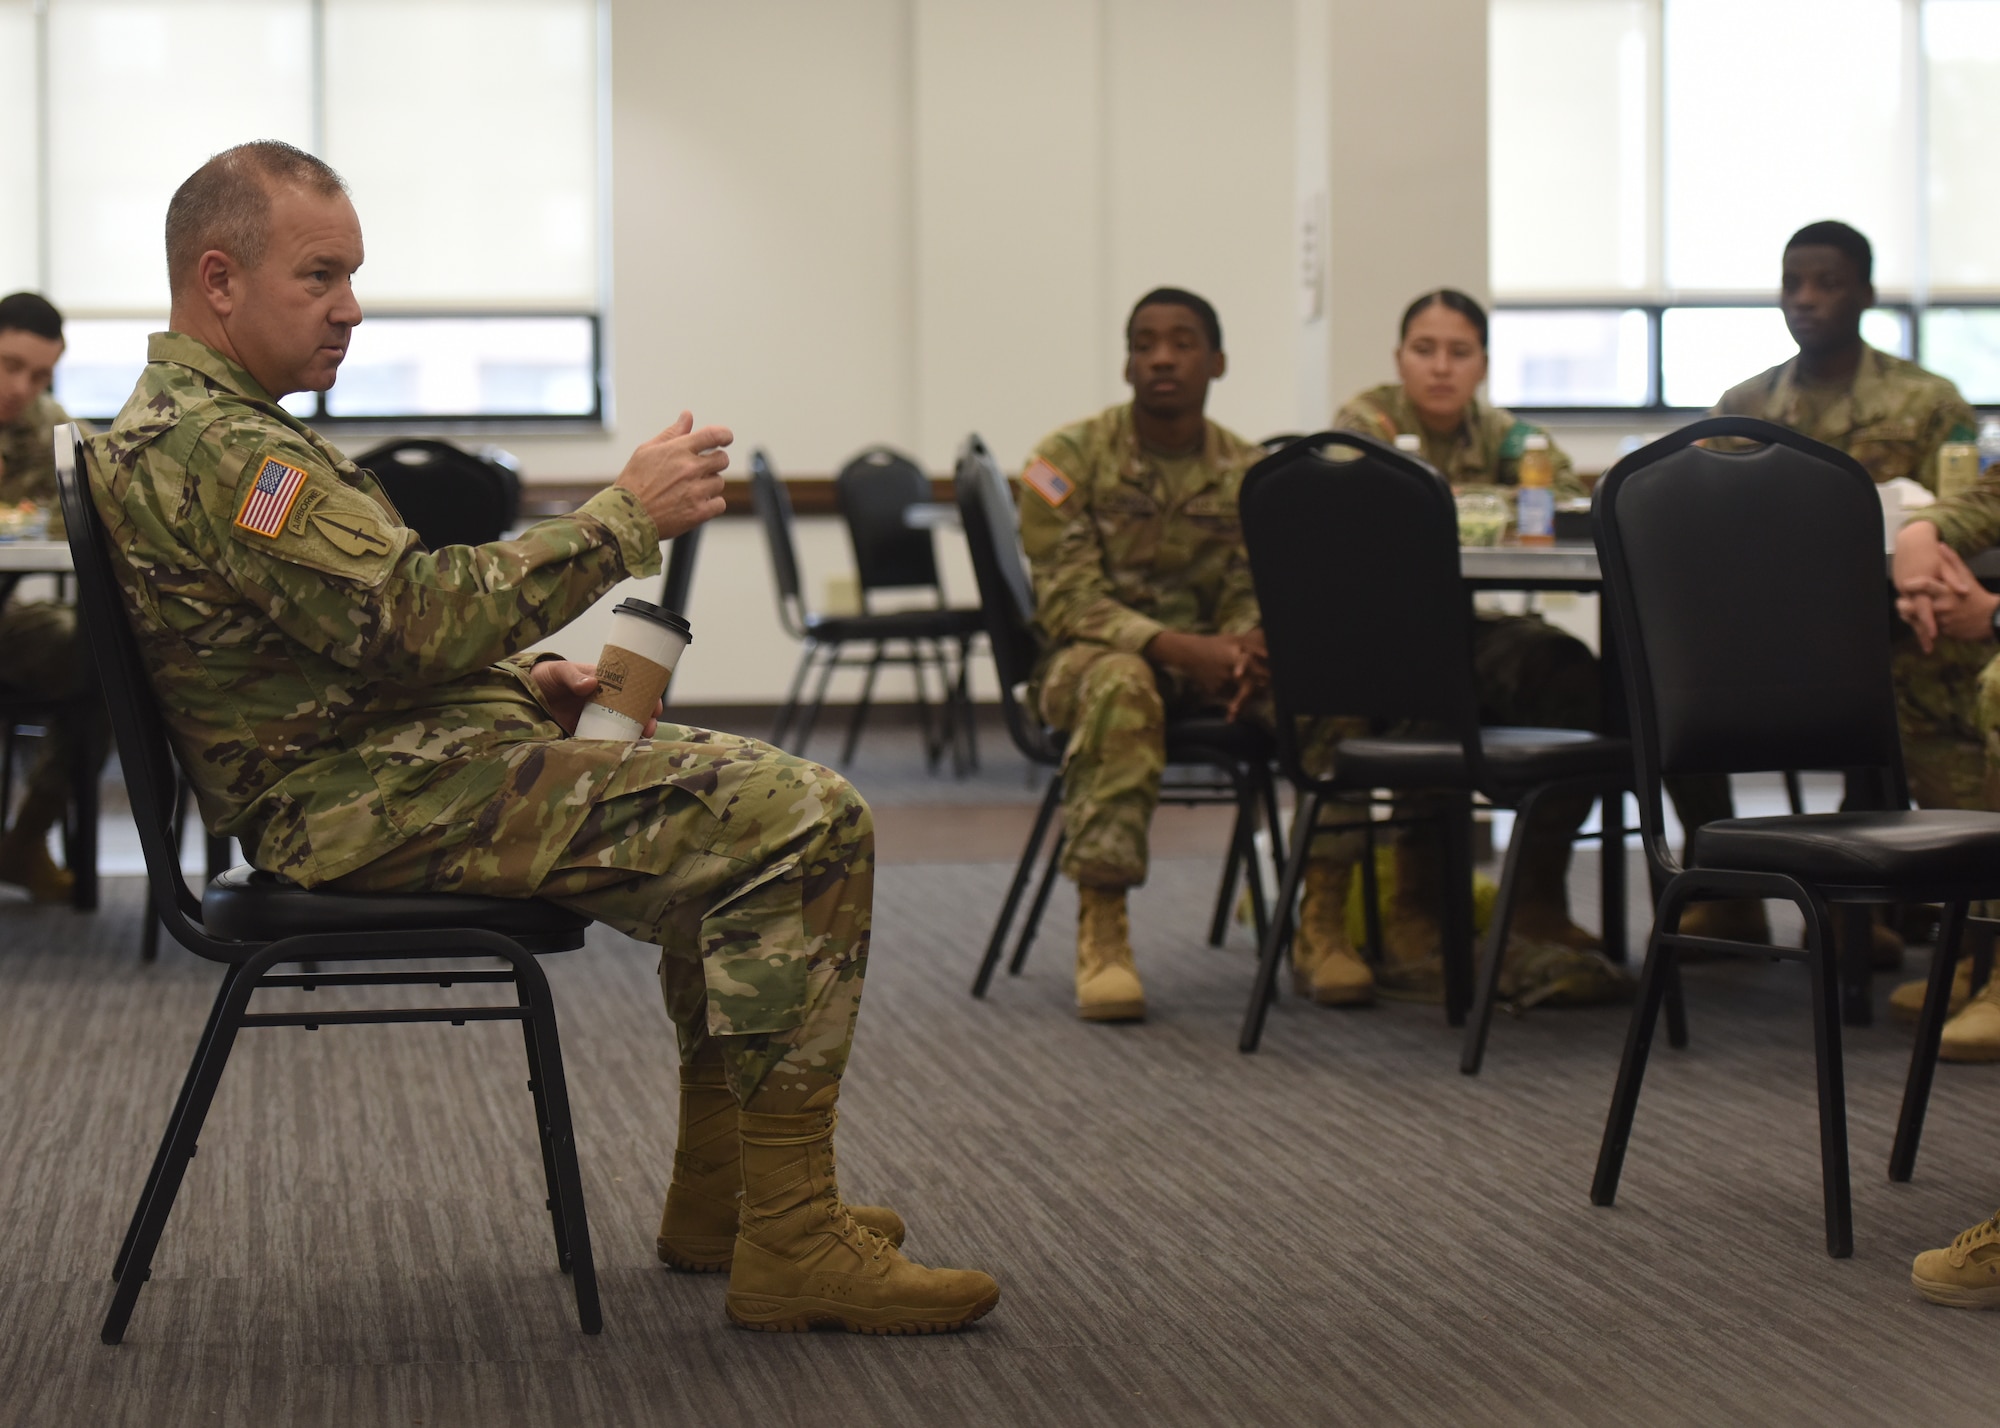 U.S. Army Maj. Gen. Anthony Hale, commanding general of the U.S. Army Intelligence Center of Excellence, talks with 344th Military Intelligence Battalion students at Goodfellow Air Force Base, Texas, August 18, 2022. Hale received input from the students on how to improve the learning environment. (U.S. Air Force photo by Airman 1st Class Zachary Heimbuch)